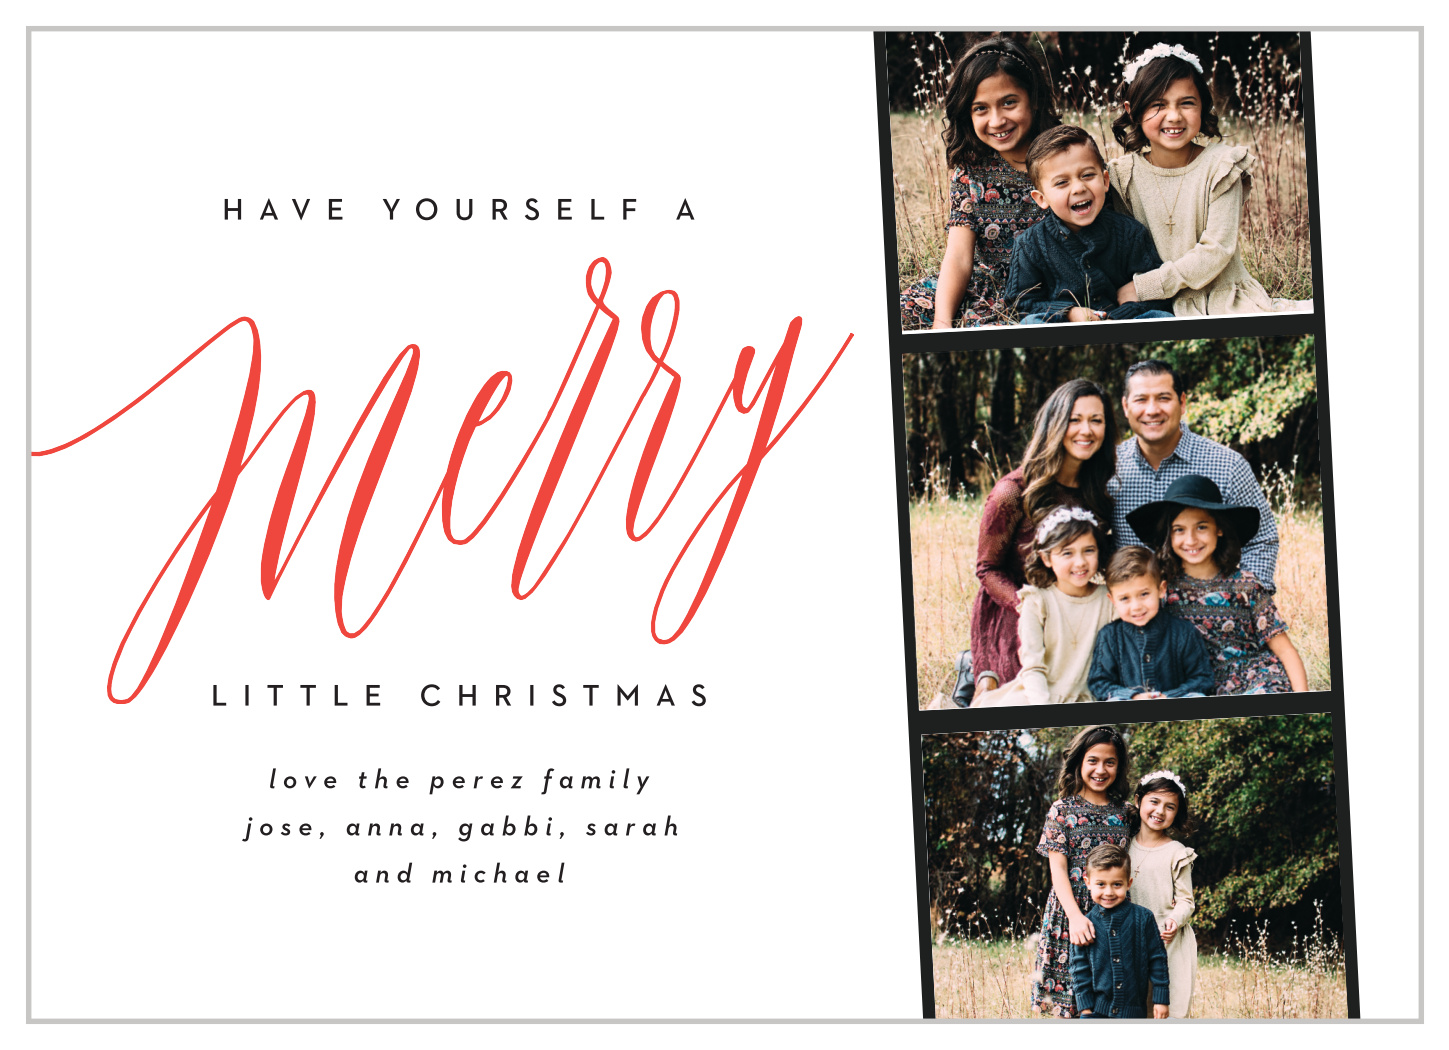 Photo Booth Wide Christmas Cards